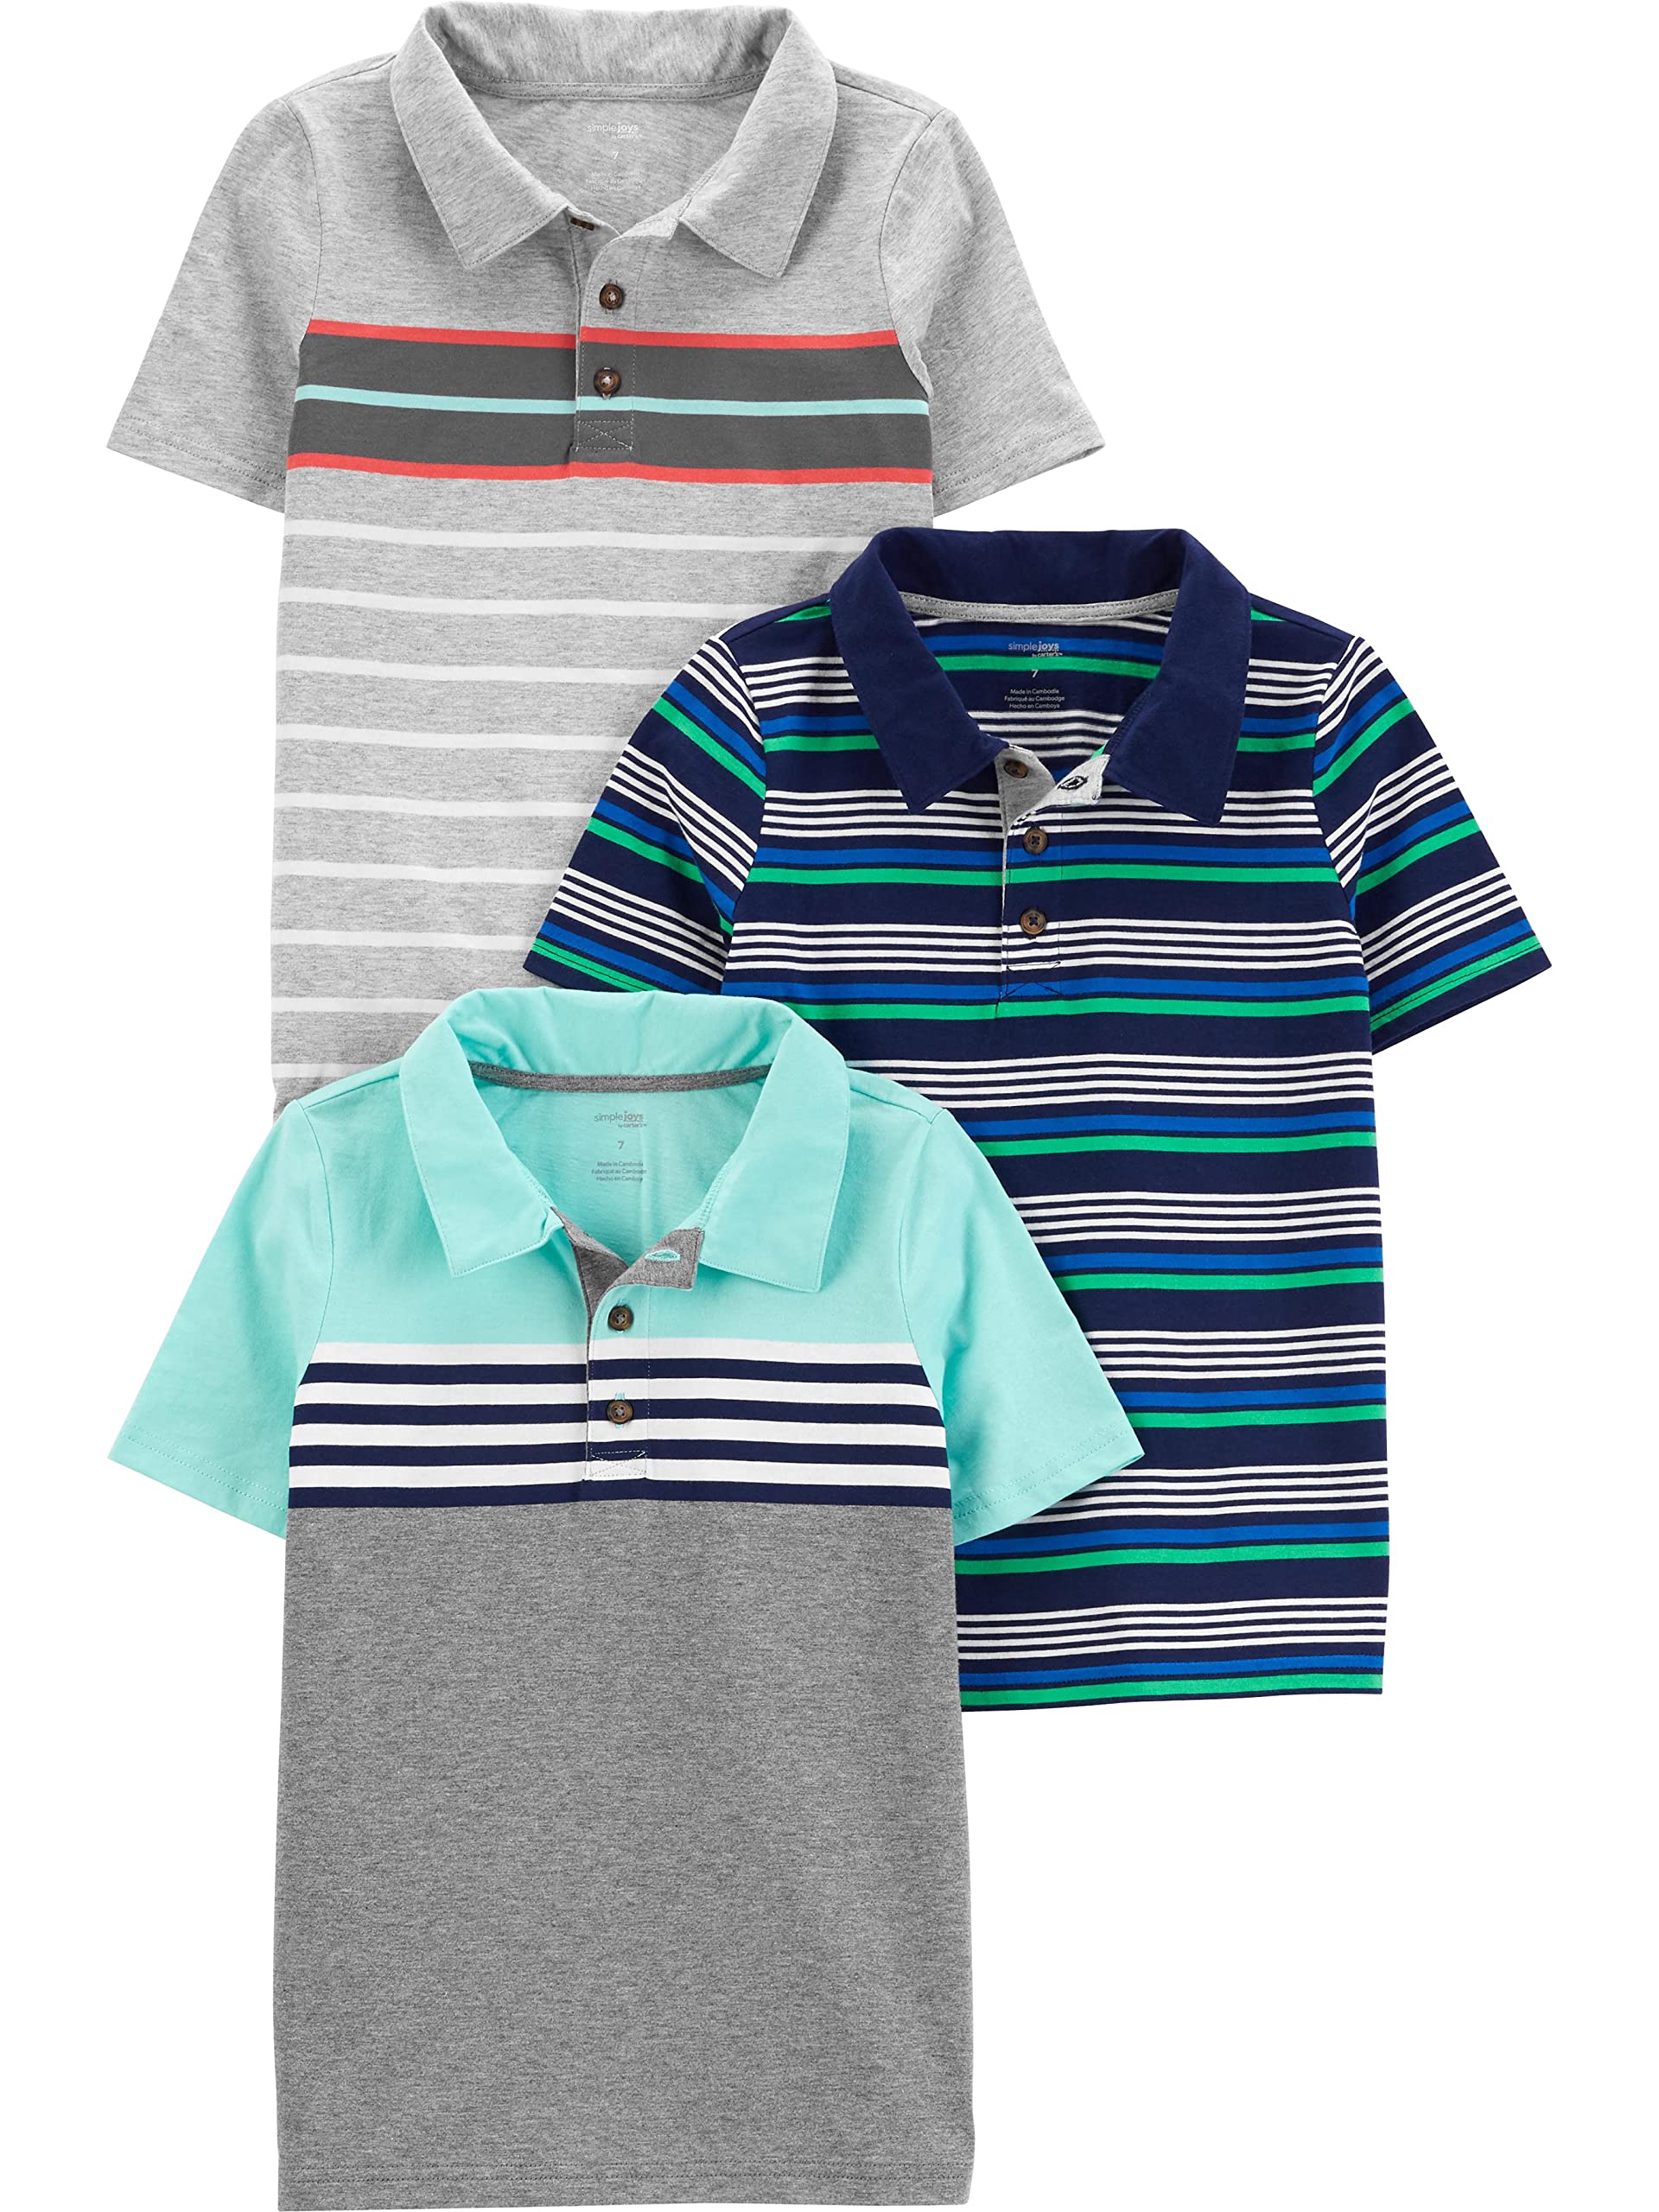 Simple Joys by Carter's Toddler Boys' Short-Sleeve Polo, Pack of 3